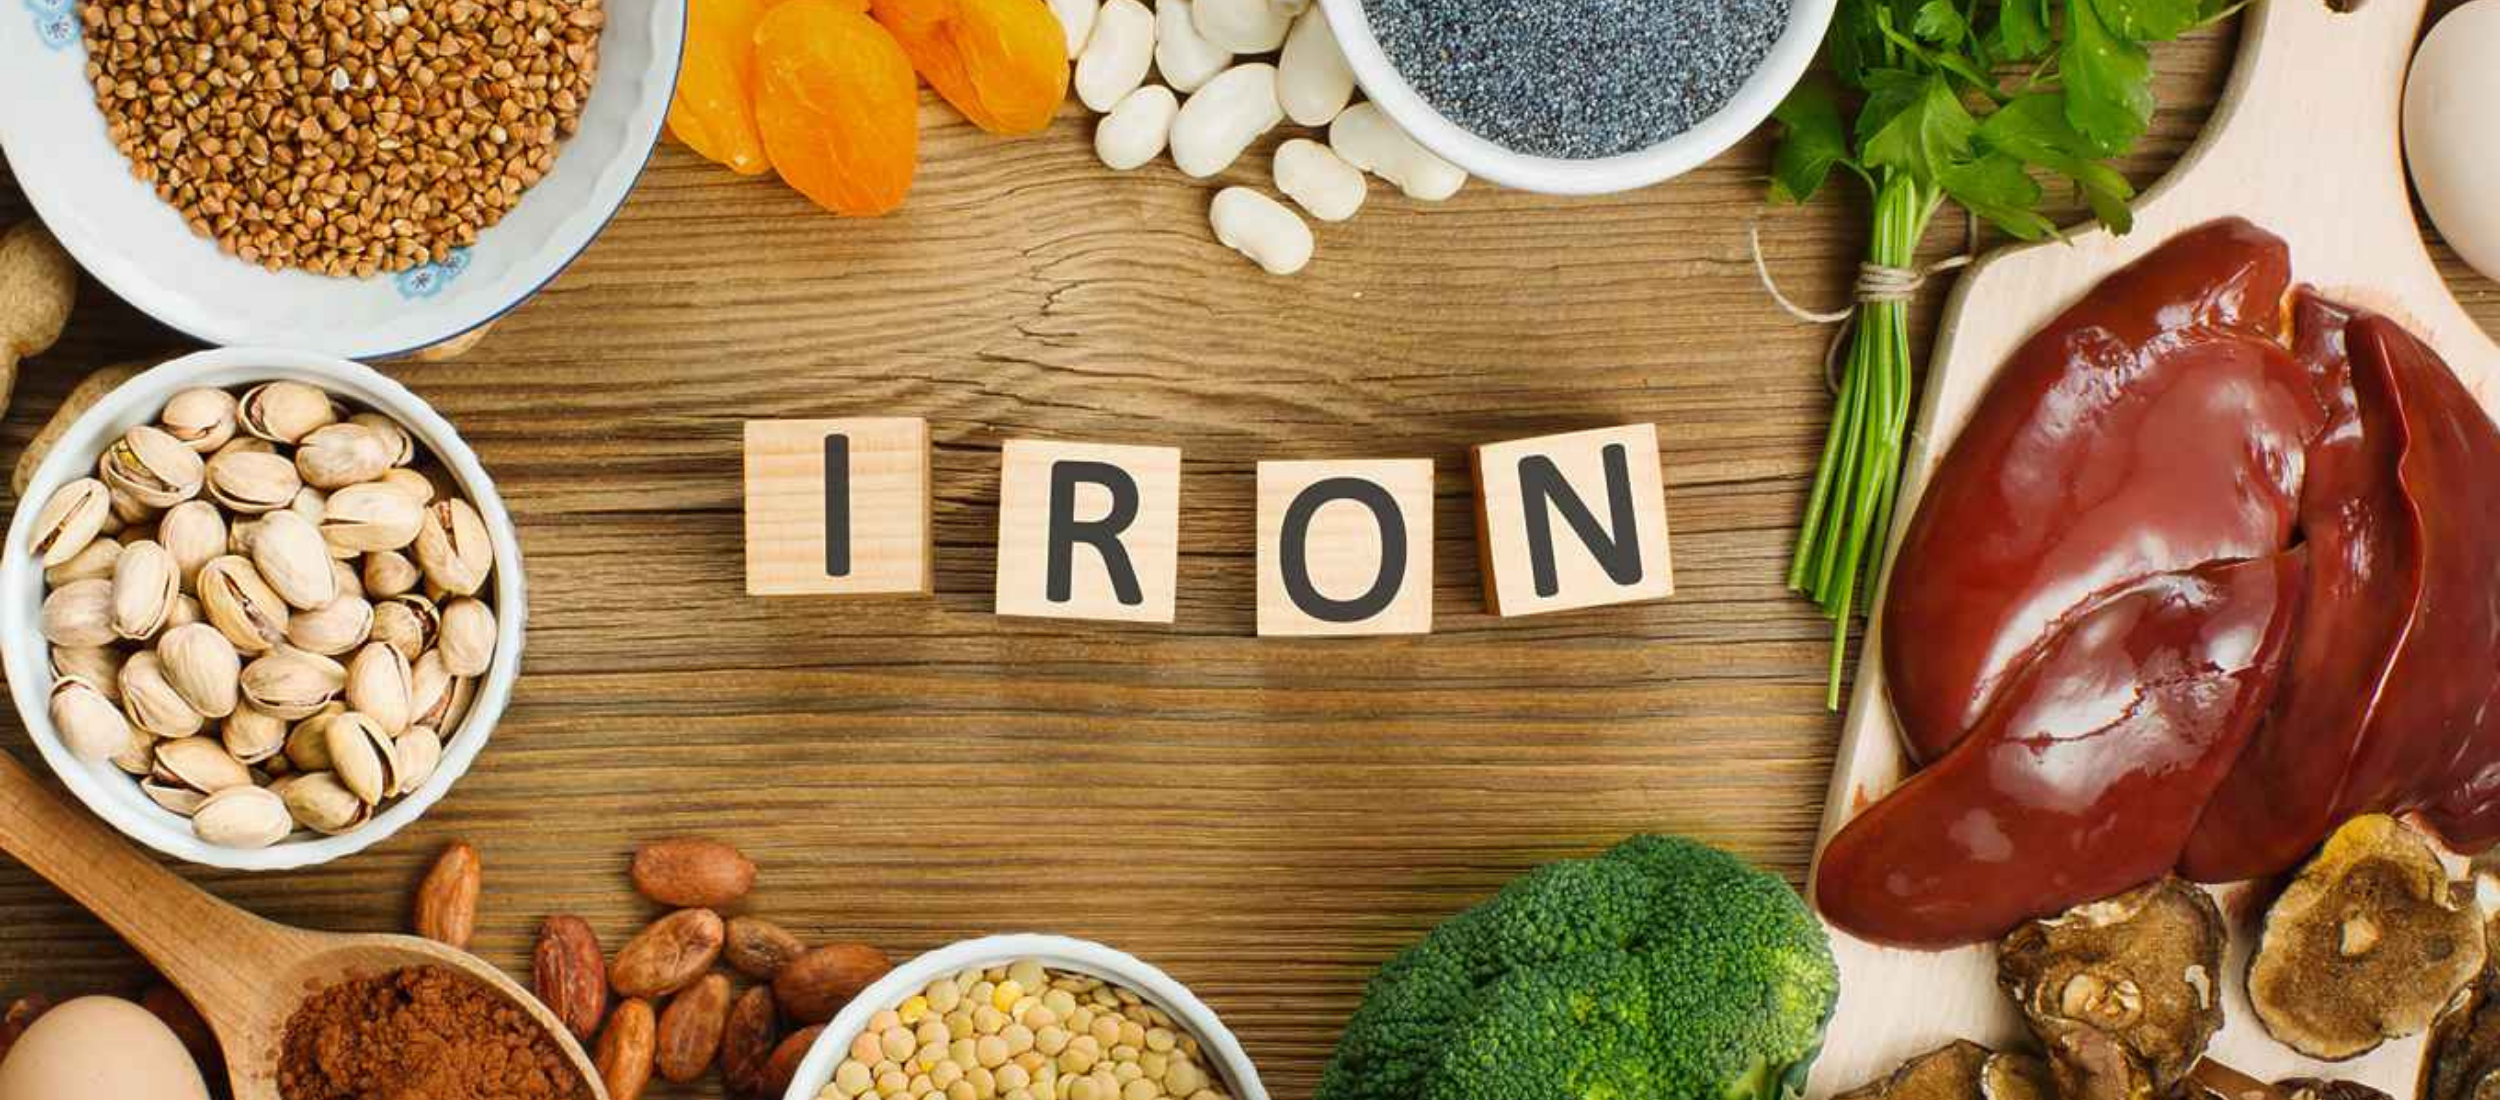 10 iron-packed vegetarian foods (and how to eat them)